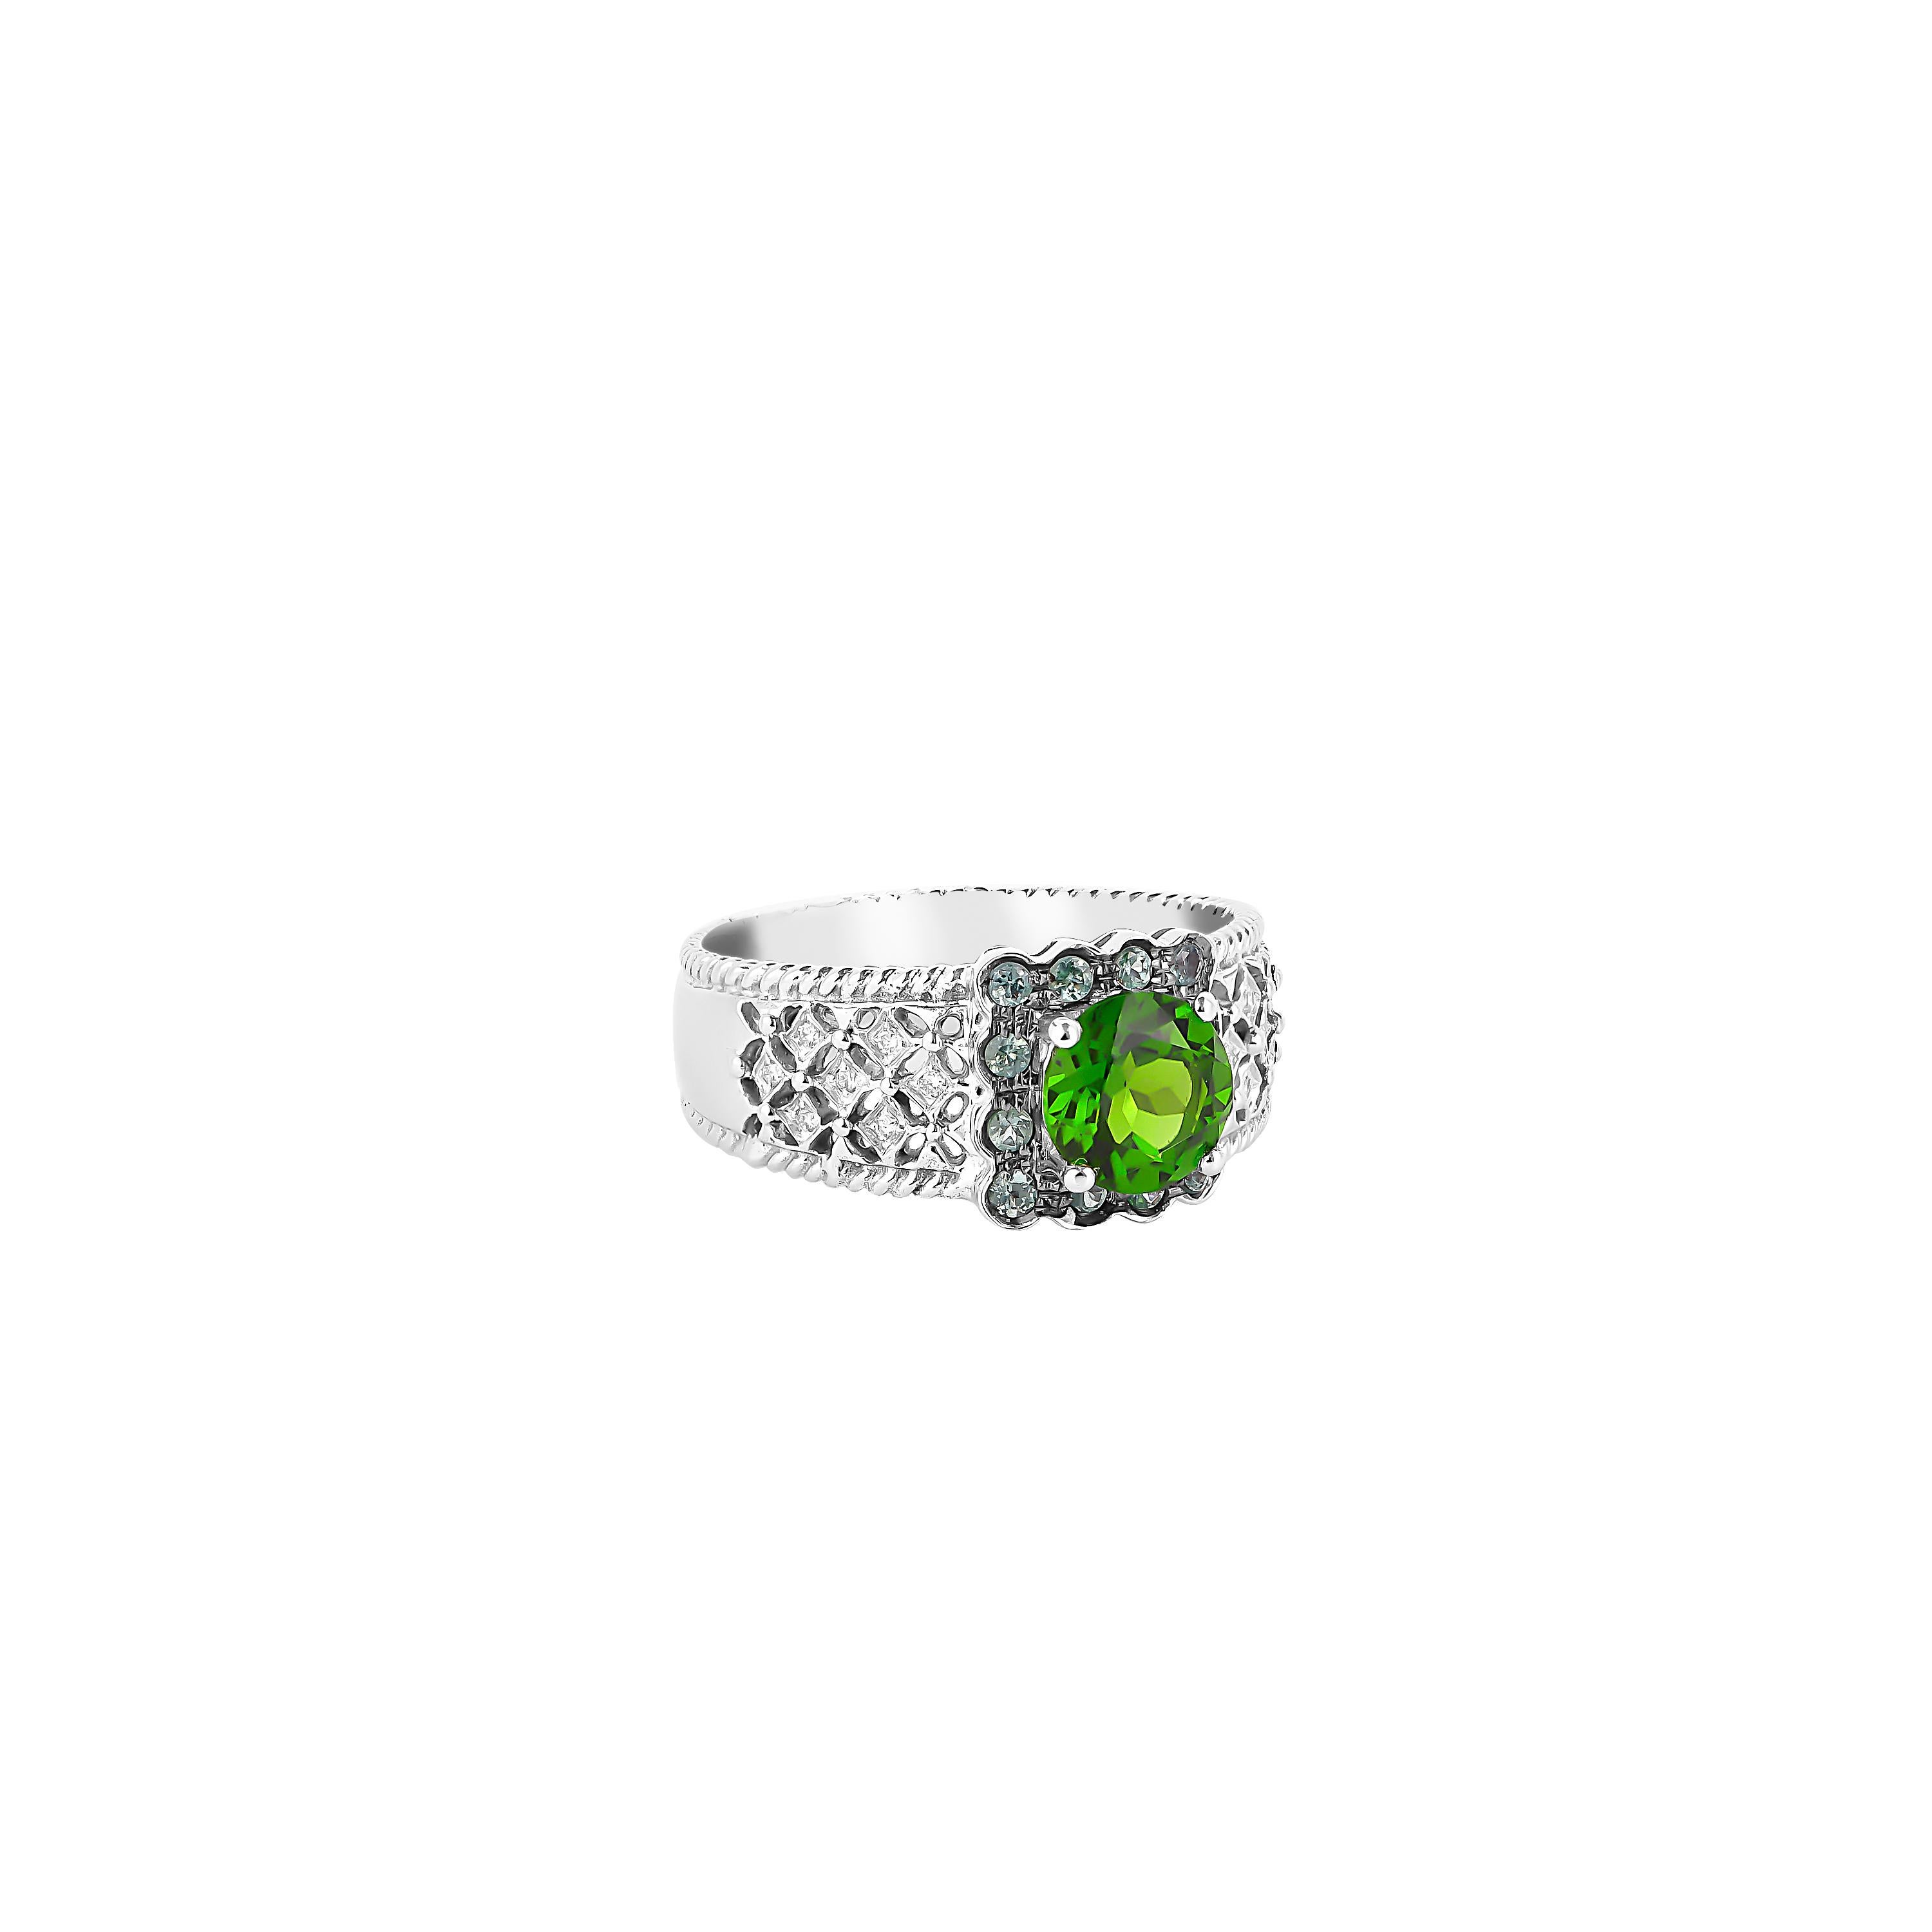 Unique and Designer Cocktail Rings by Sunita Nahata Fine Design.

Classic Chrome Diopside ring in 14K White gold with Alexandrite and Diamonds. 

Chrome Diopside: 1.10 carat, 6.50mm size, round shape.
Alexandrite: 0.162 carat, 1.50mm size, round